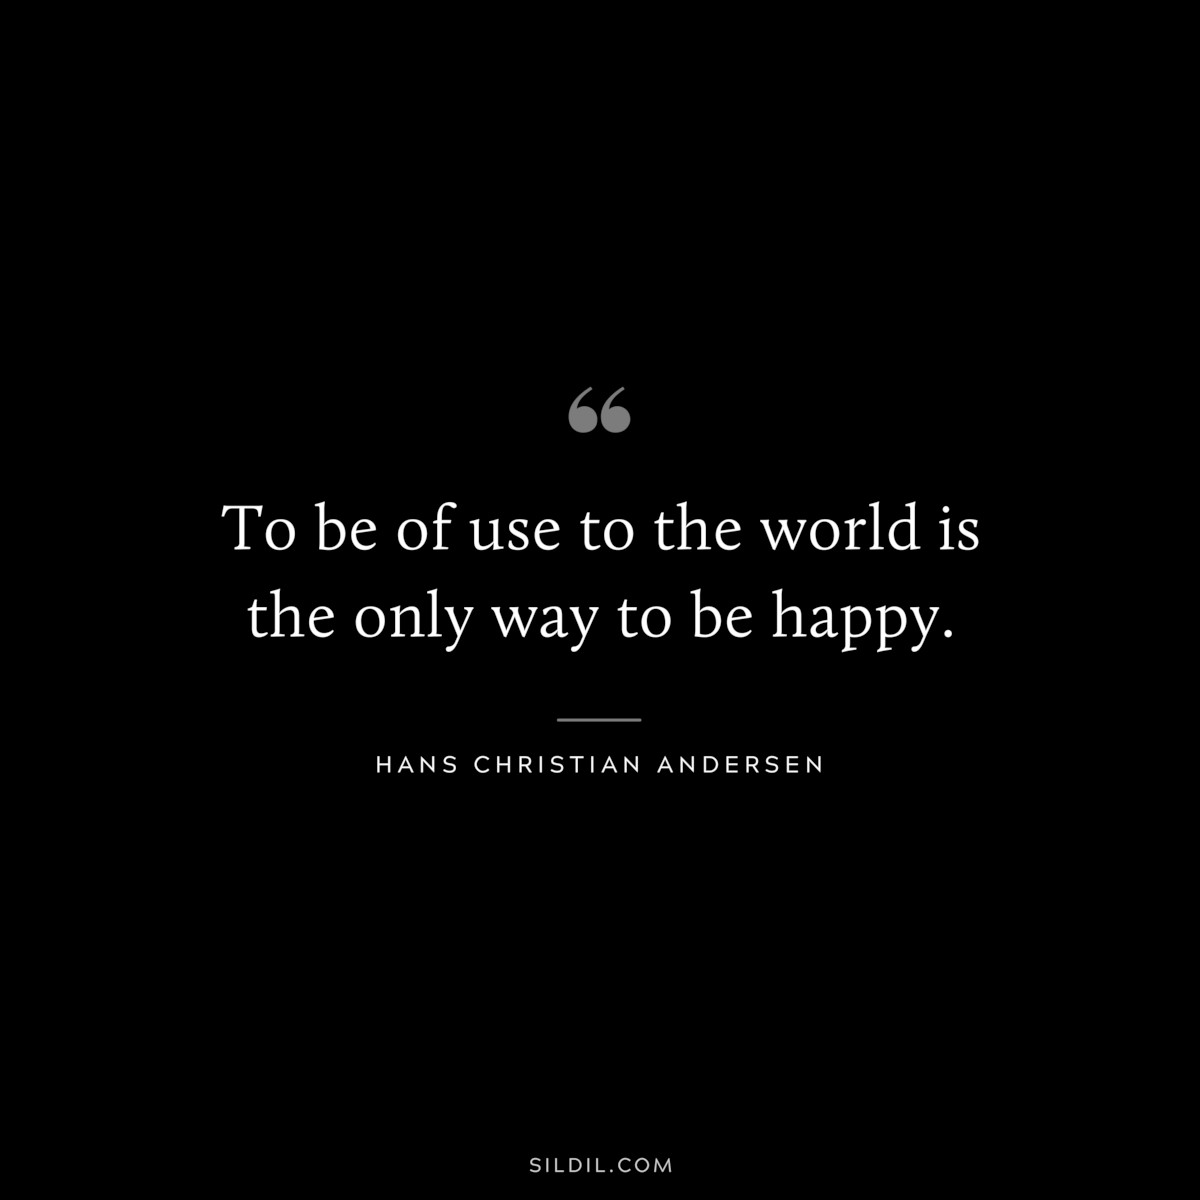 To be of use to the world is the only way to be happy. ― Hans Christian Andersen